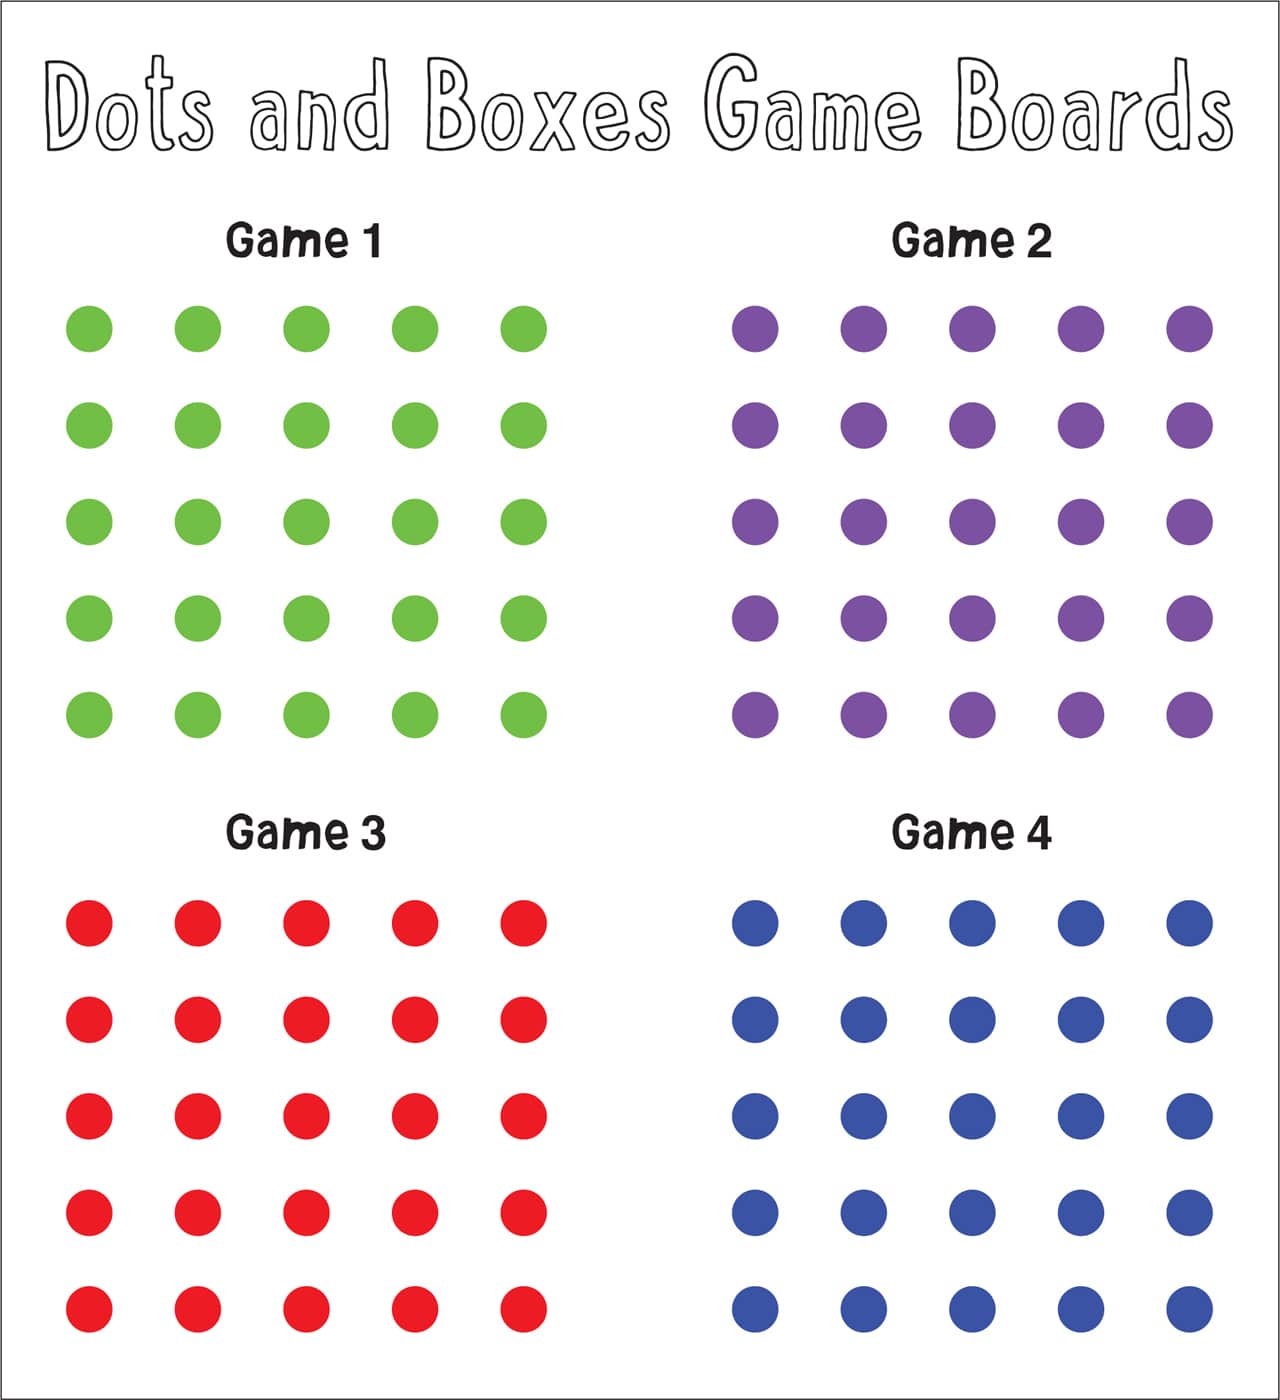 Dots and Boxes Game Boards Game 1 Game 2 Game 3 Game 4